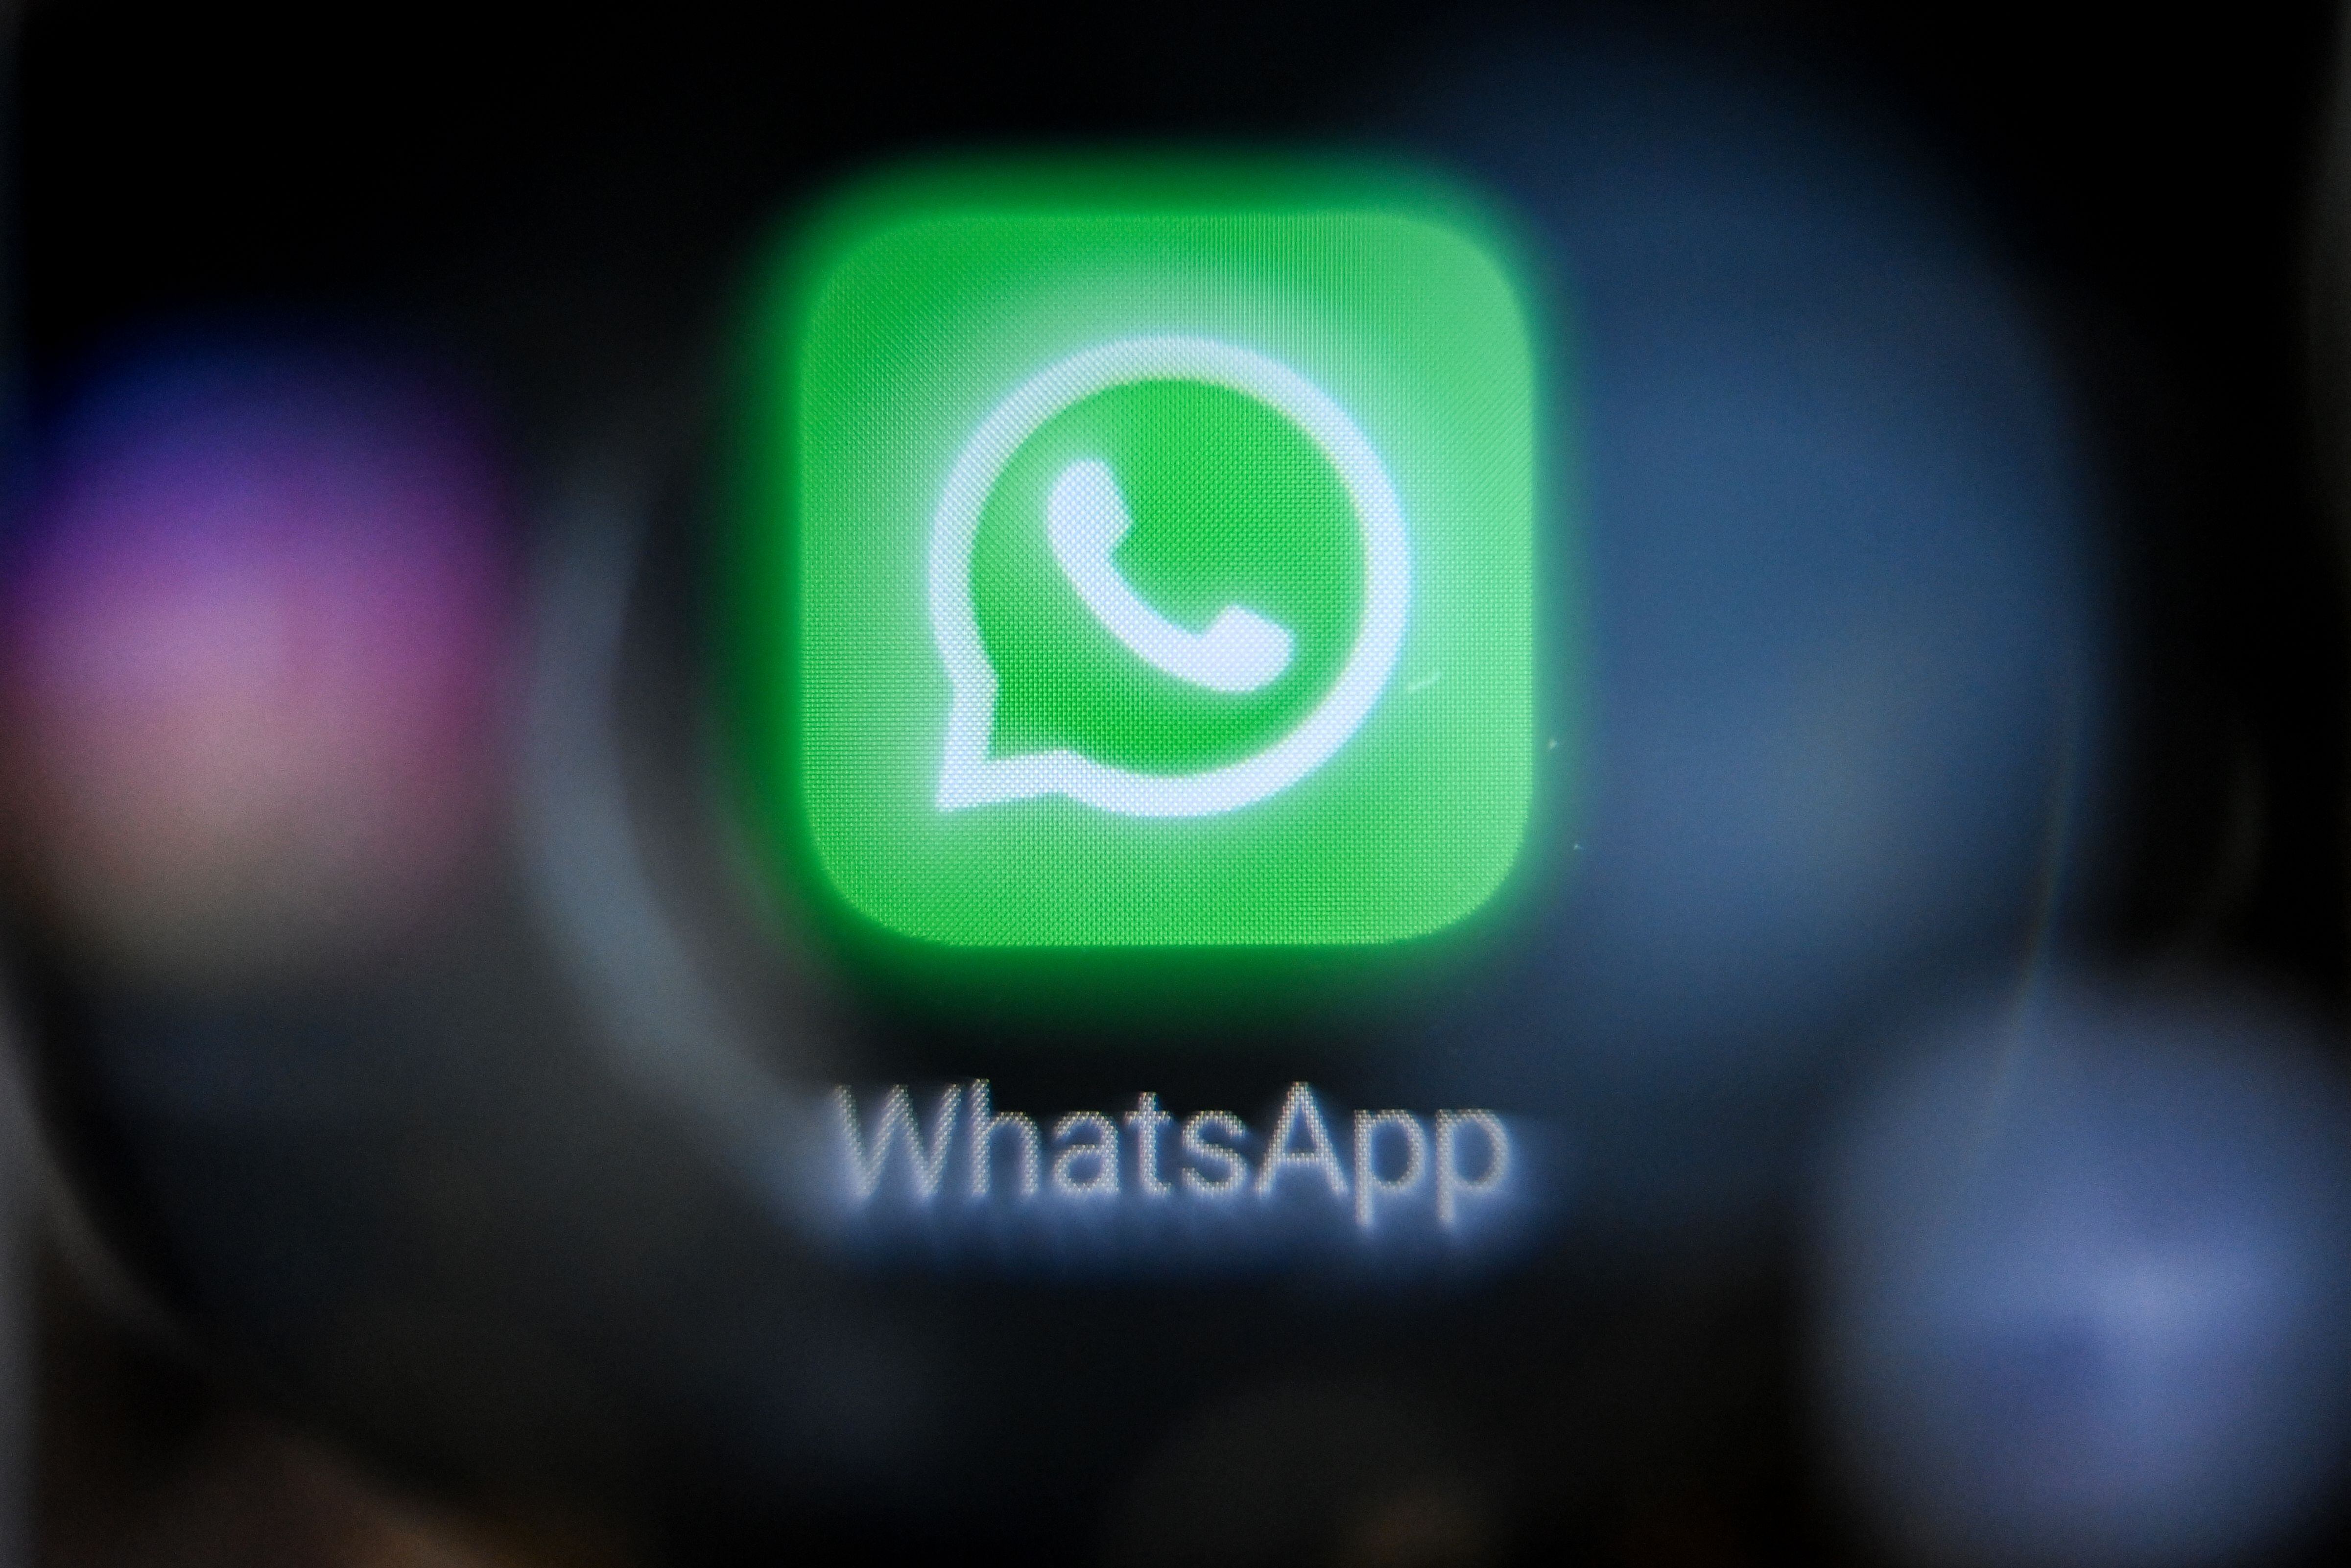 WhatsApp is one of the most popular applications on the planet.